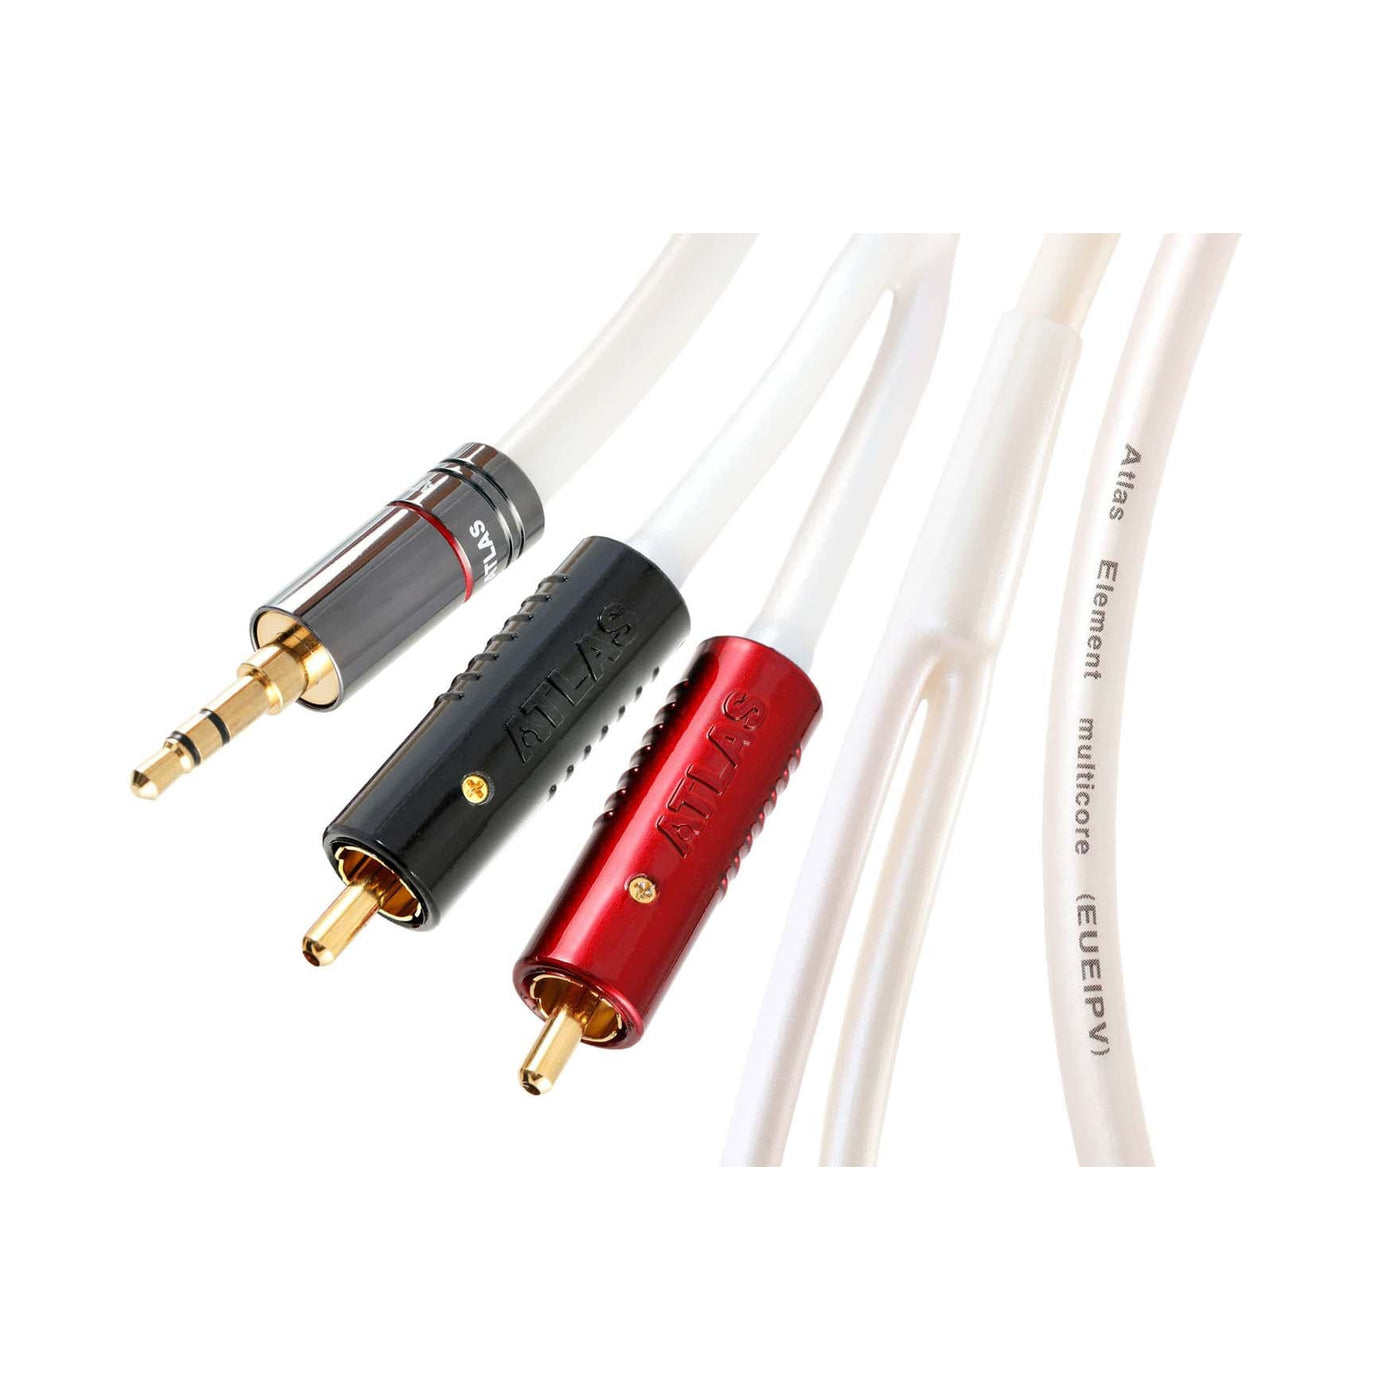 Atlas Element Metik 3.5mm - Achromatic RCA 1:2 Cable at Audio Influence